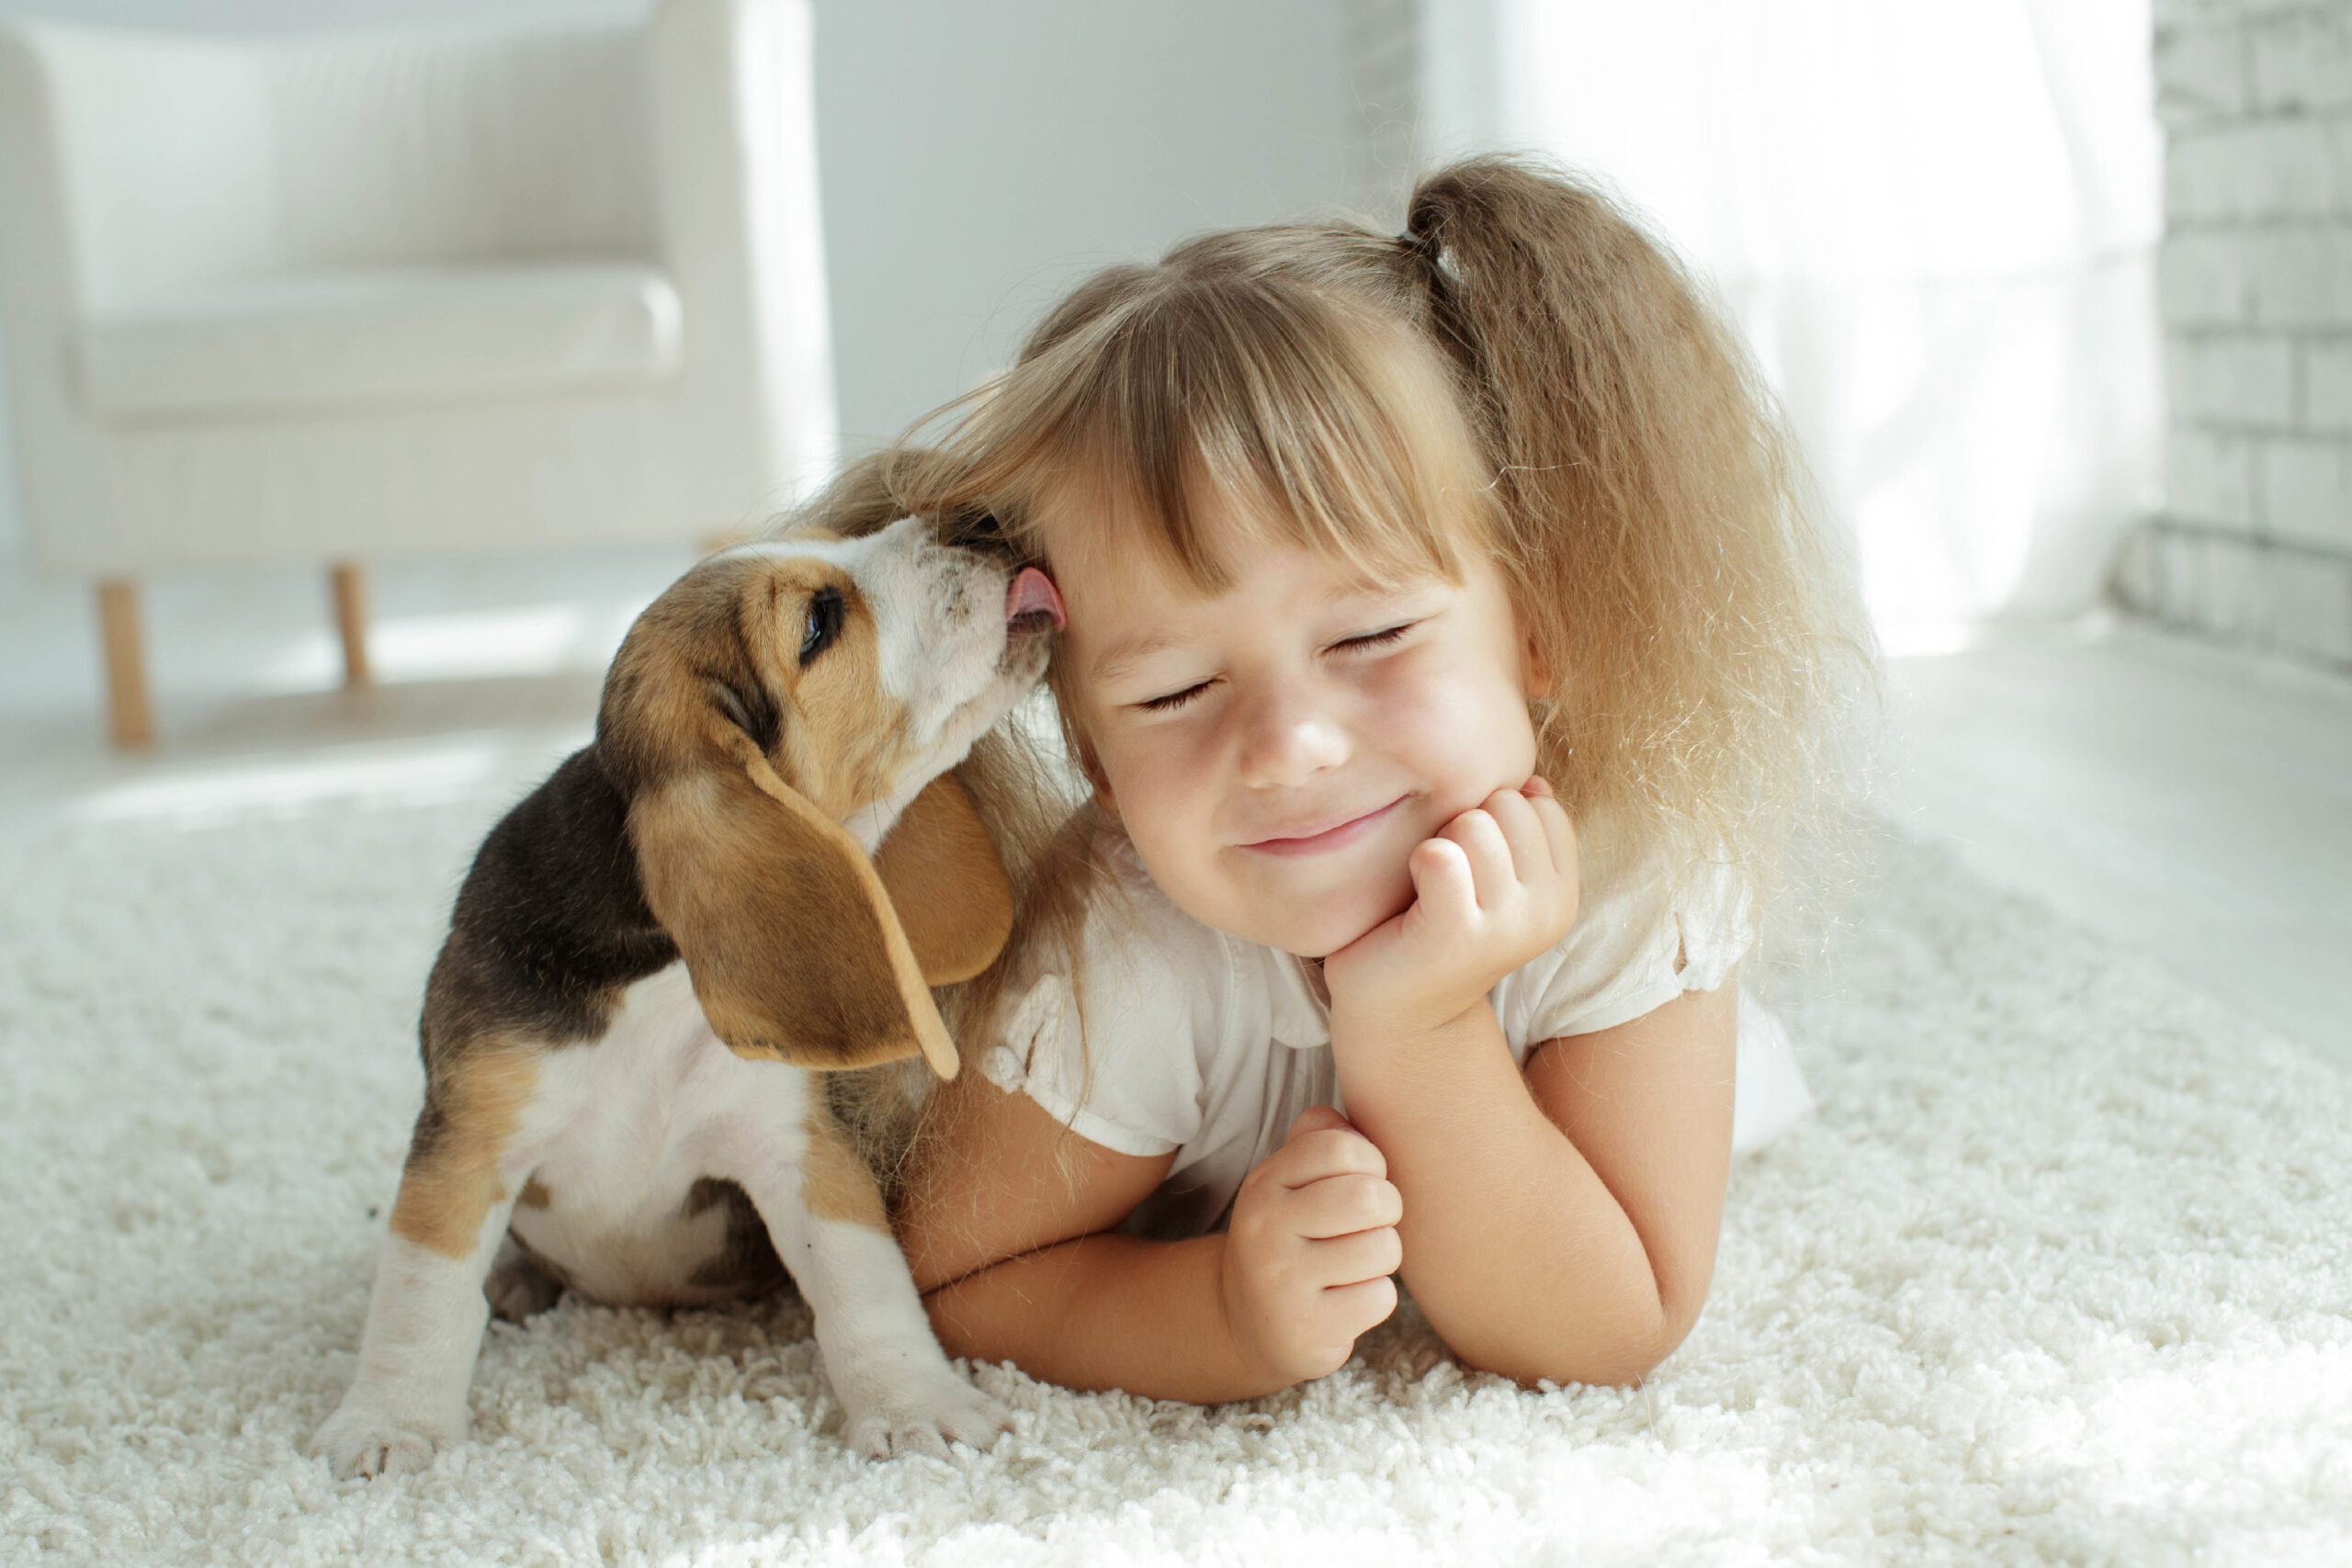 5 Things To Remember When Bringing Home A New Dog